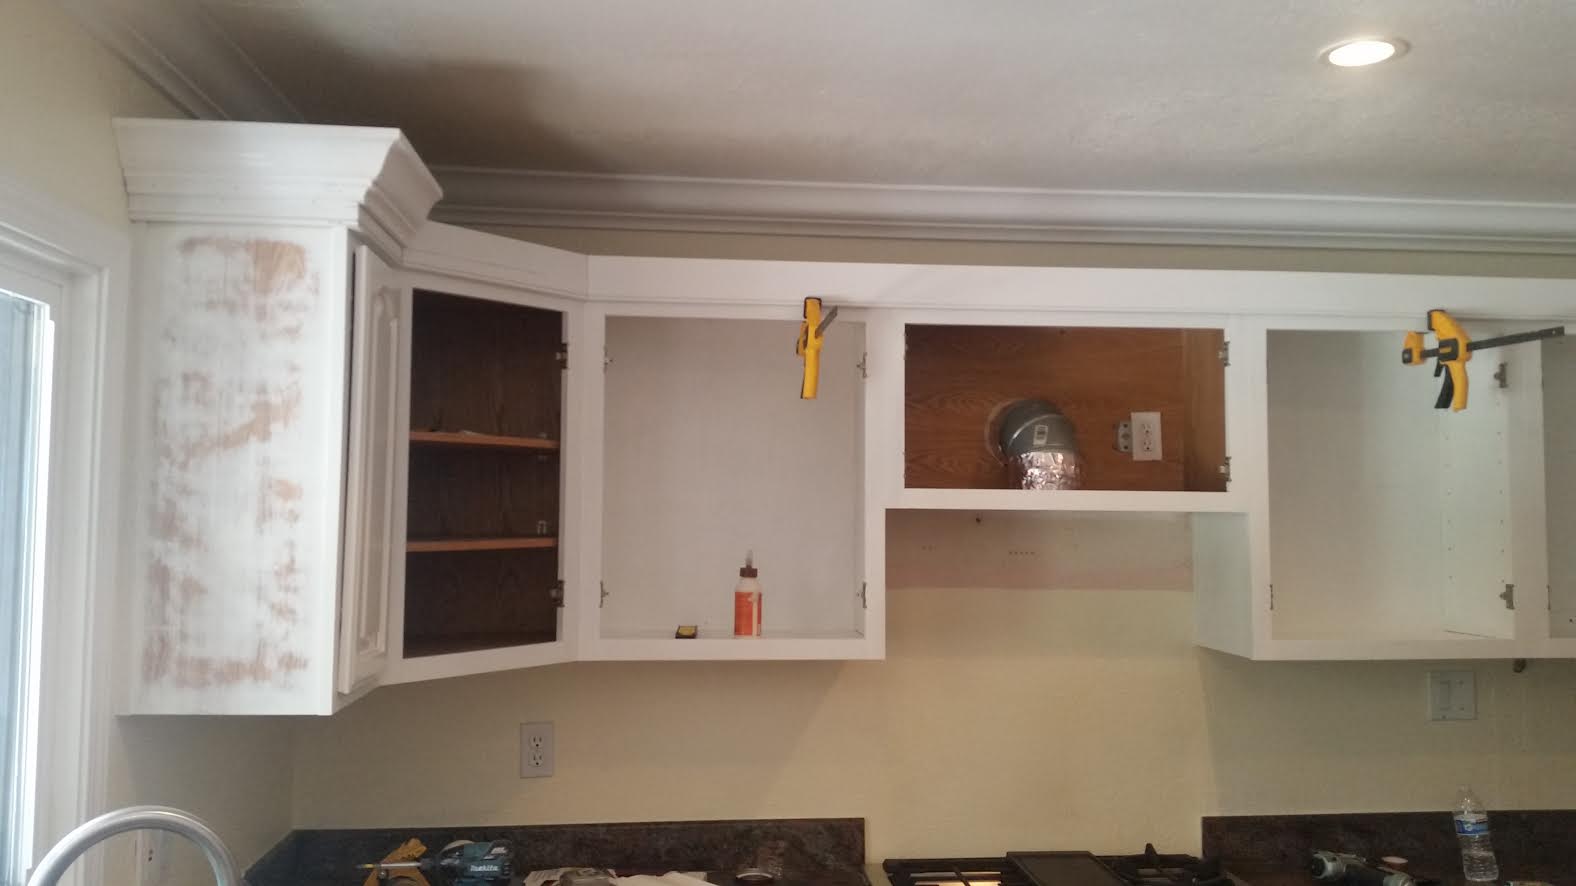 Kitchen cabinets before